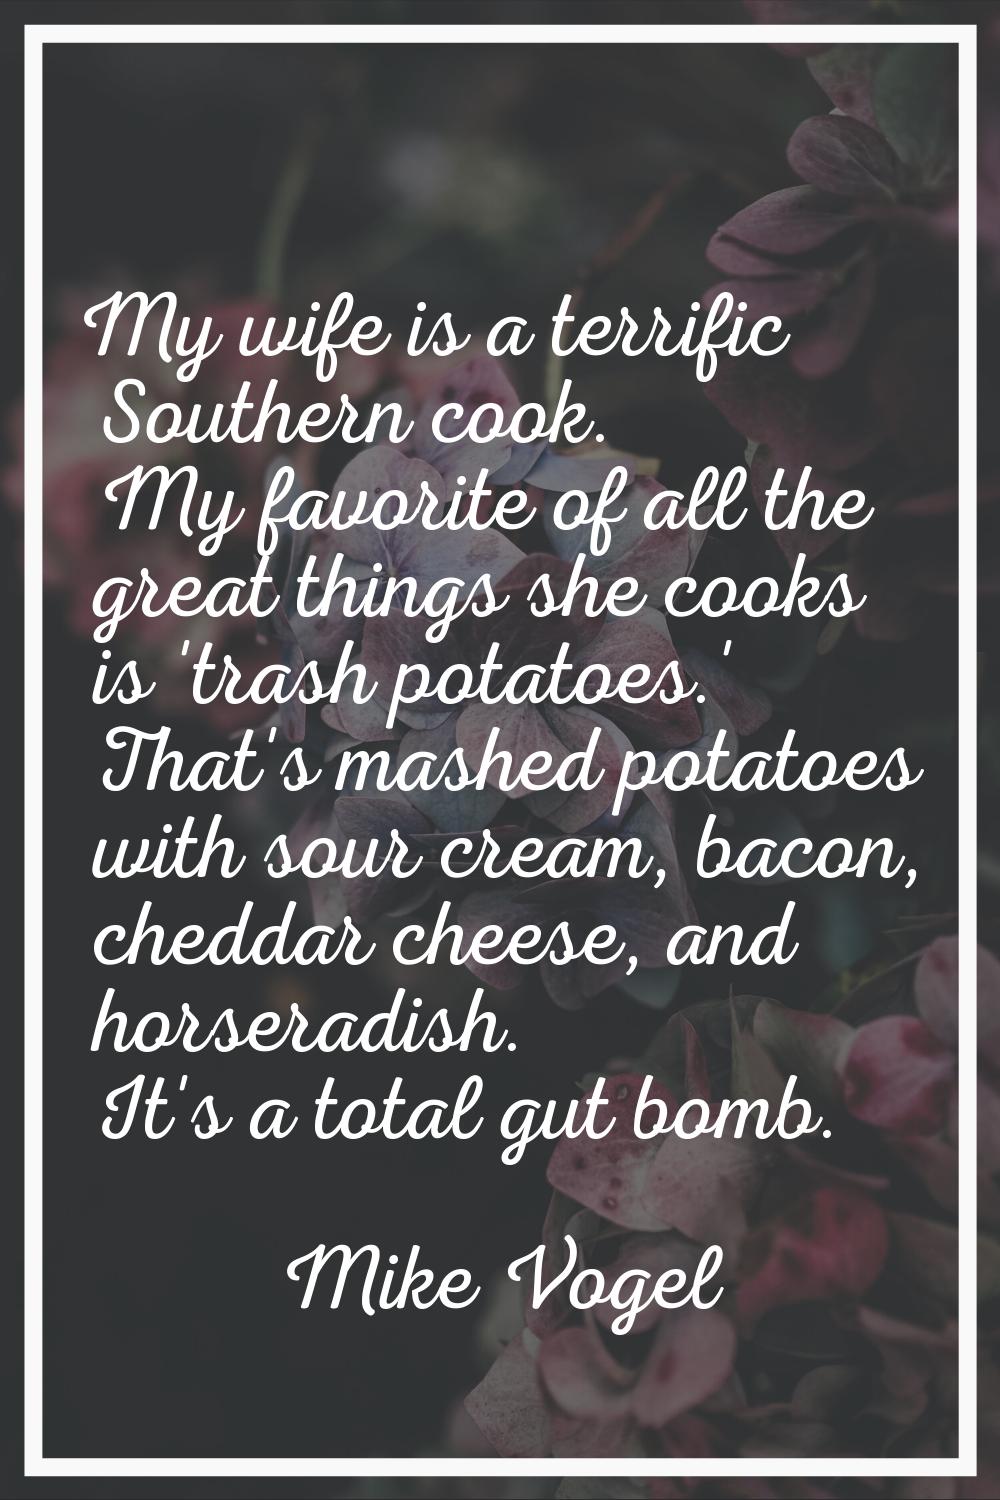 My wife is a terrific Southern cook. My favorite of all the great things she cooks is 'trash potato